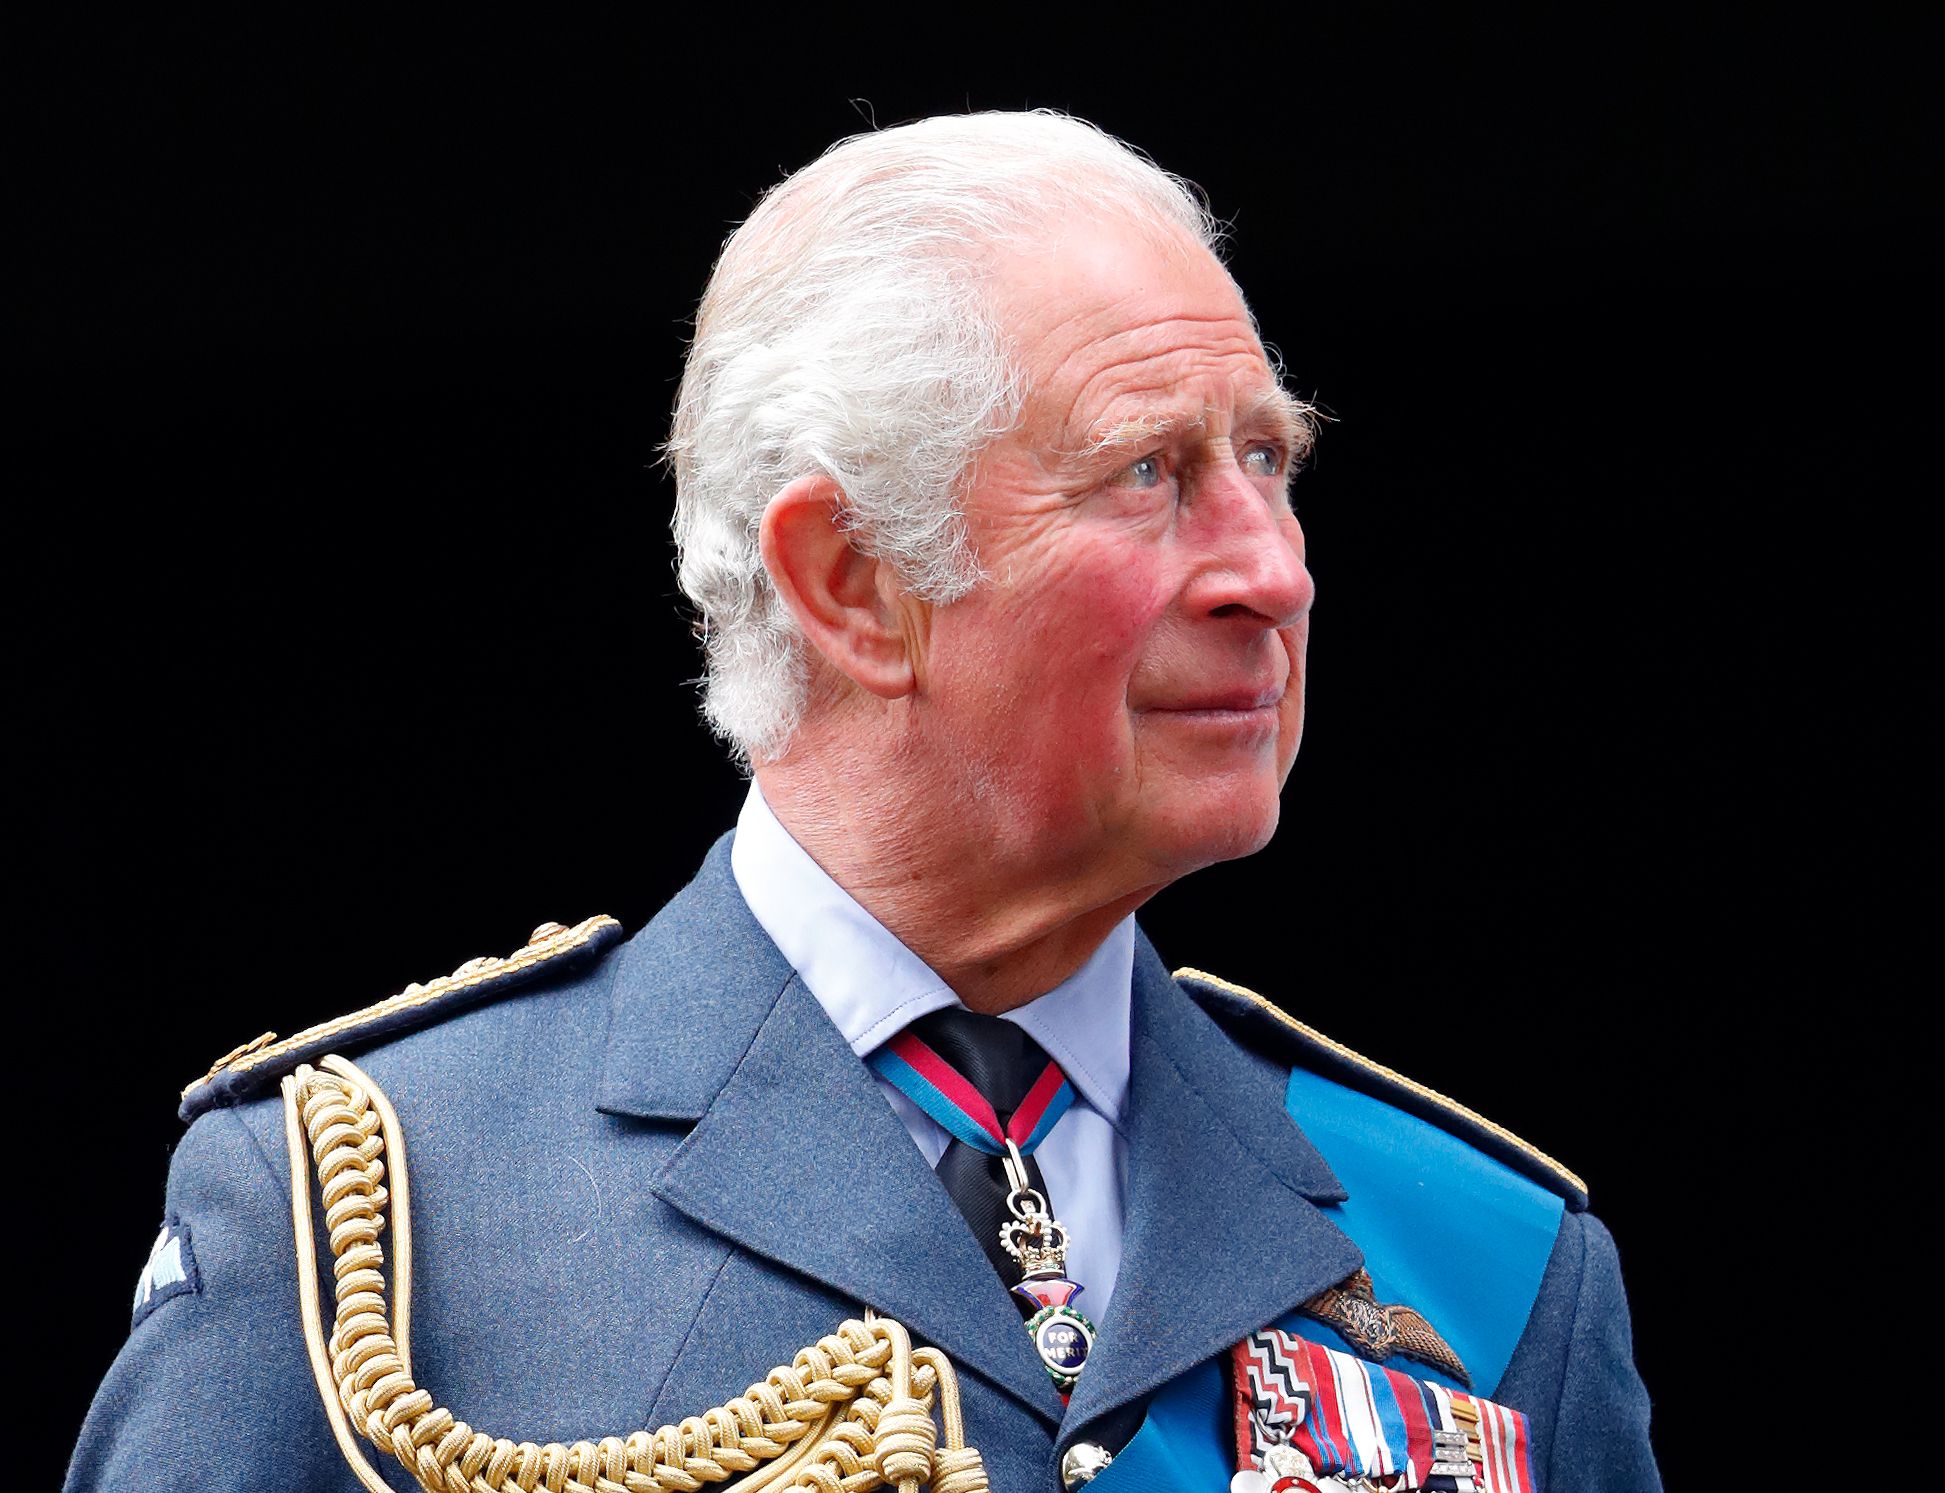 When Does Prince Charles Become King? - Is Charles King Now?